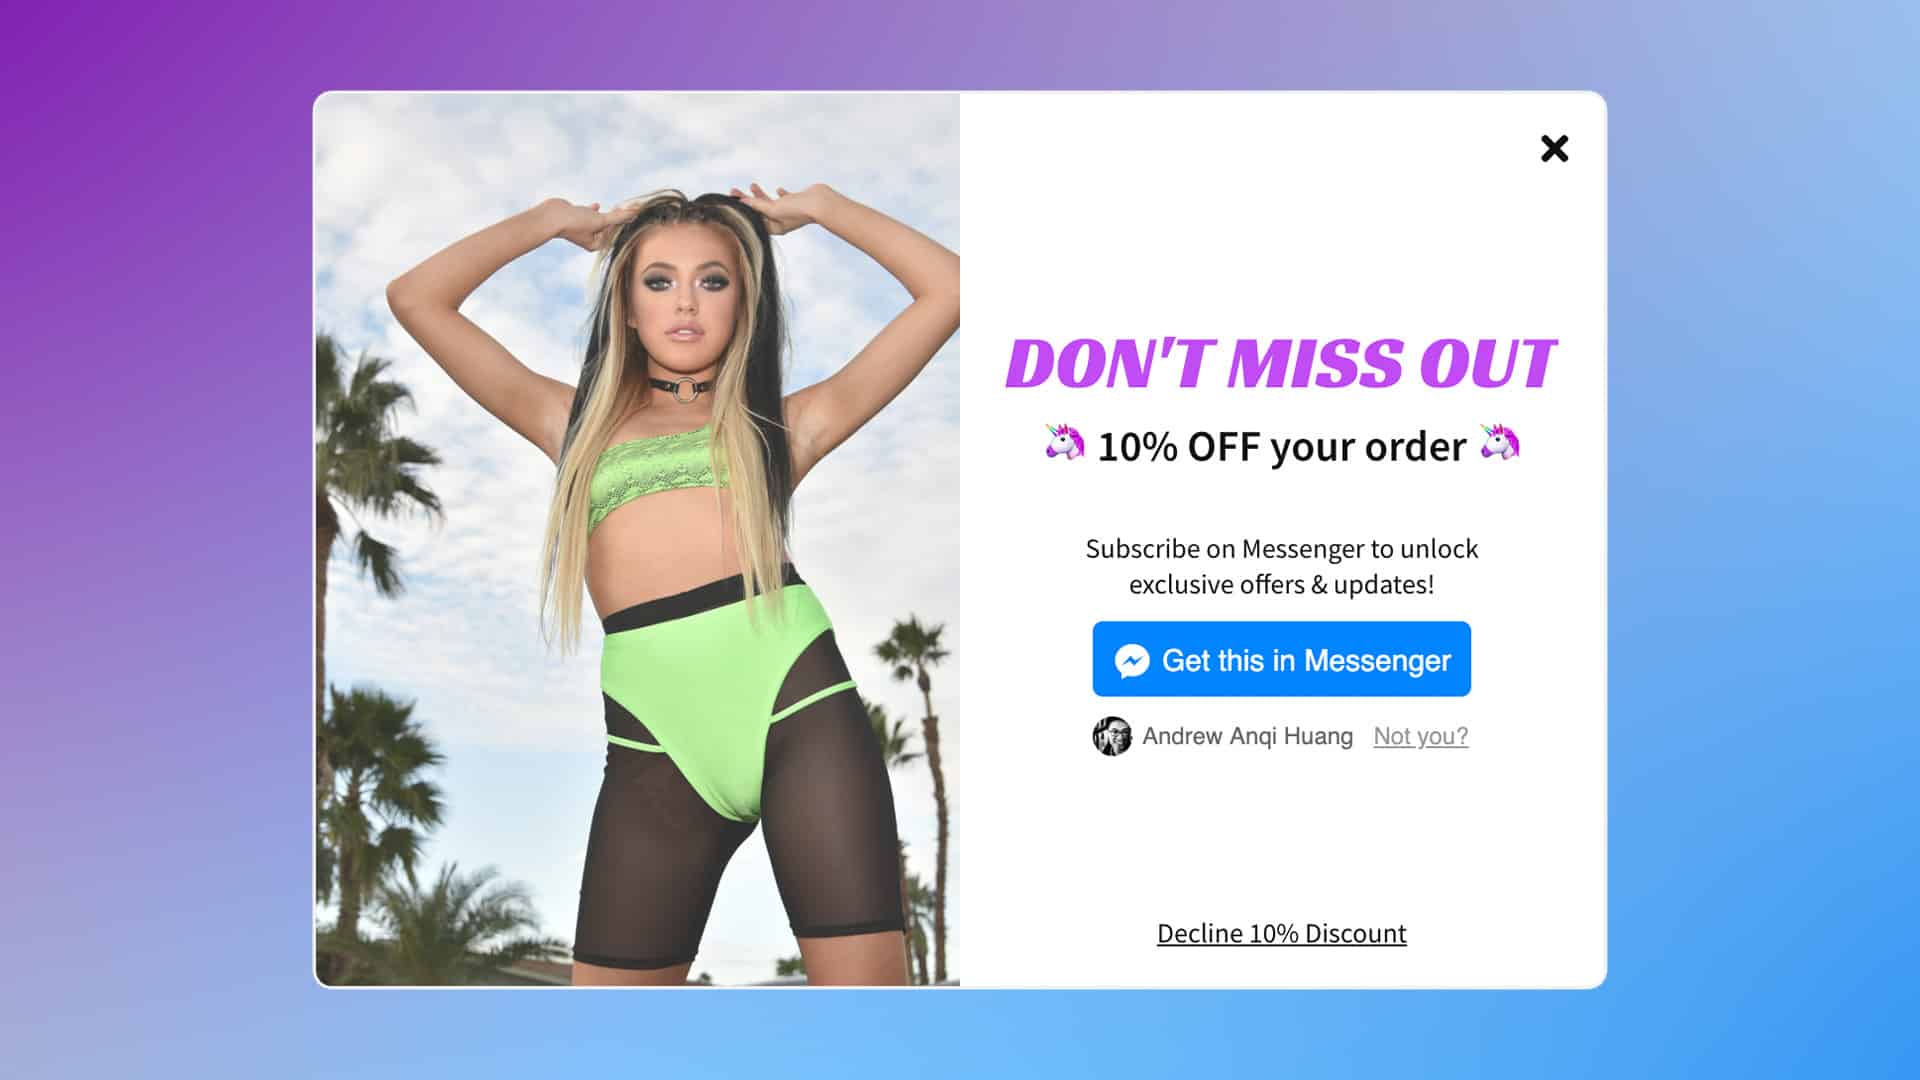 iHeartRaves growth plugin overlay offering 10% off. Cool blue gradient background with a photo of a young woman wearing a neon green two-piece body suit with thigh-length black fishnet stockings on underneath.